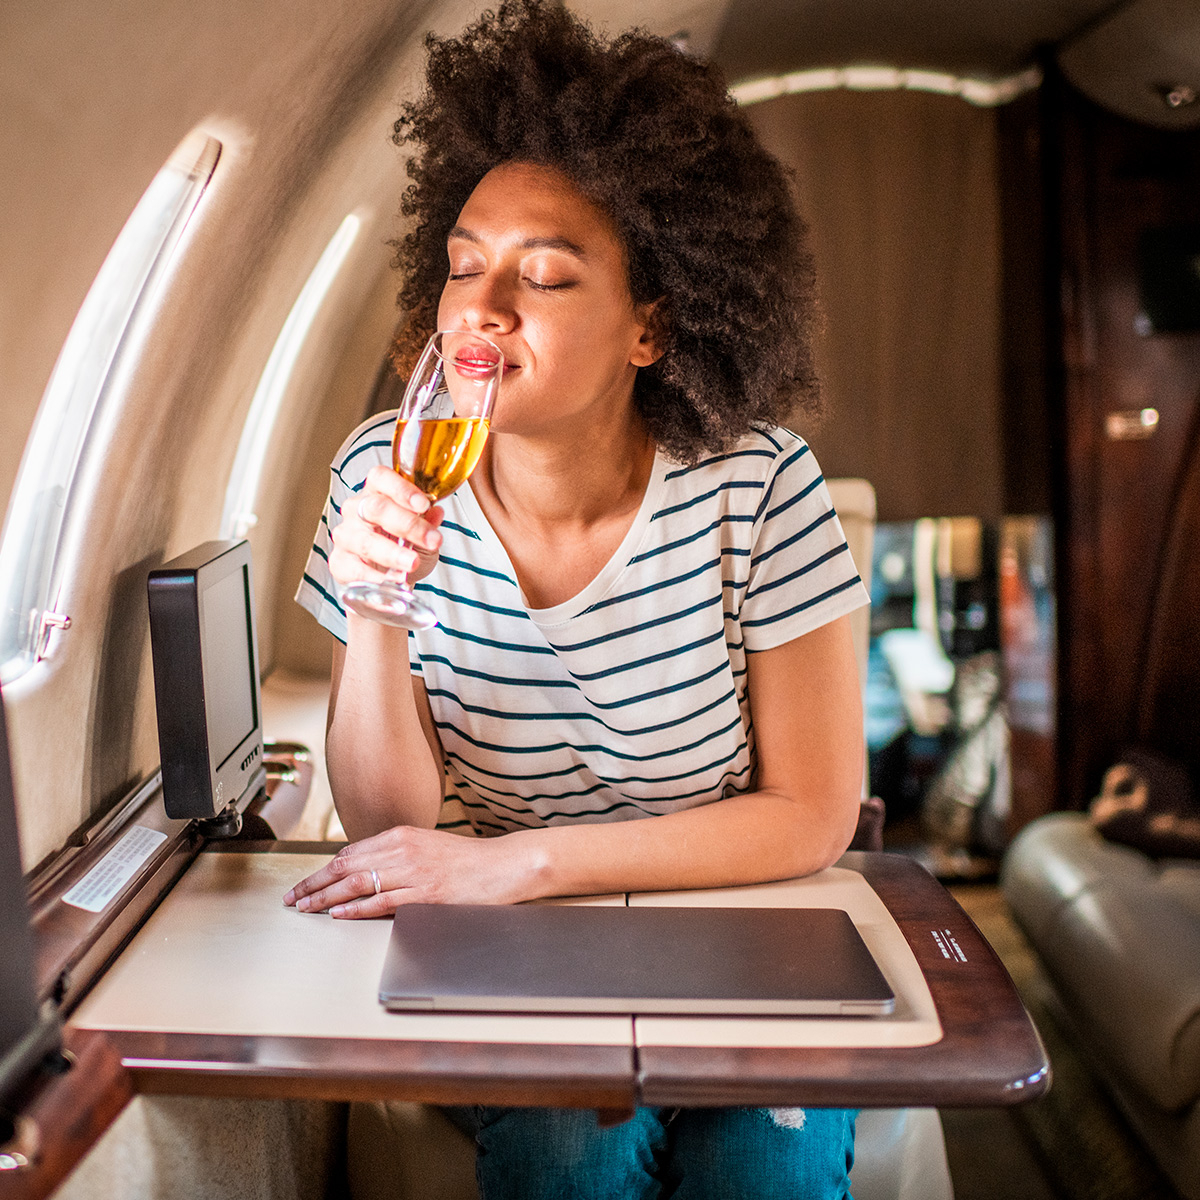 18 Top-Rated Travel Finds That Will Make Economy Feel Like First Class